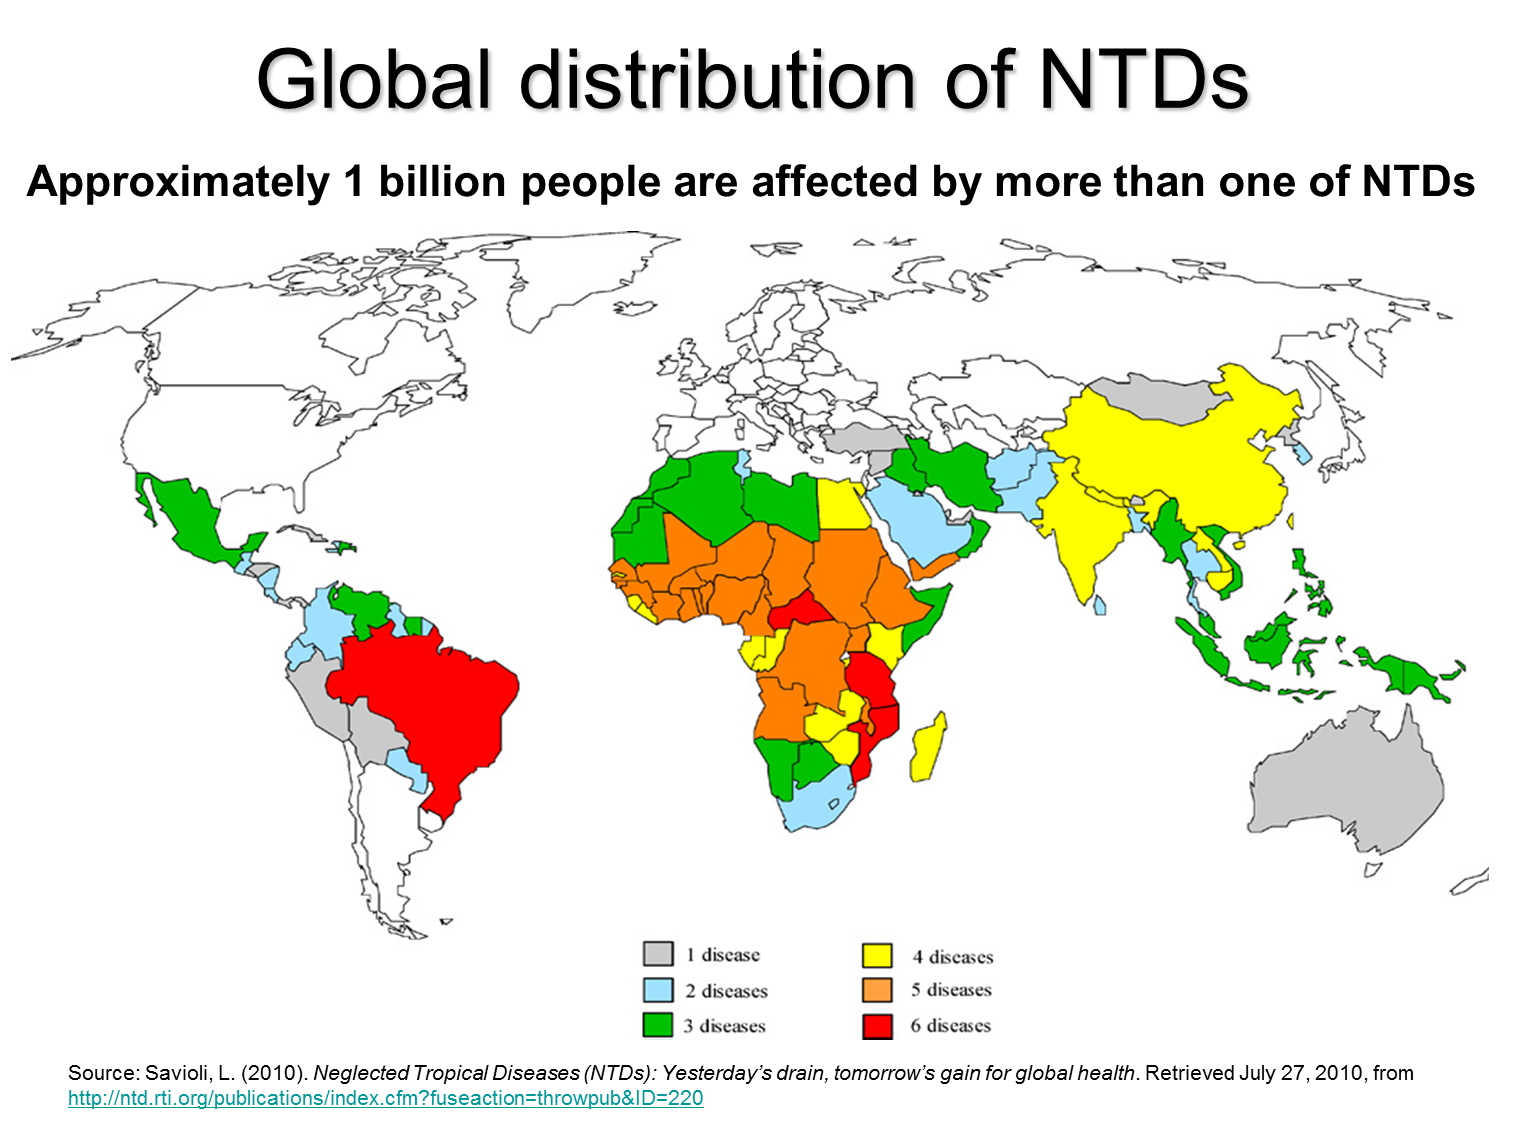 Neglected Tropical Diseases are endemic in low-income, underserved populations. Most are easily preventable and treatable; yet their global burden is considerable.